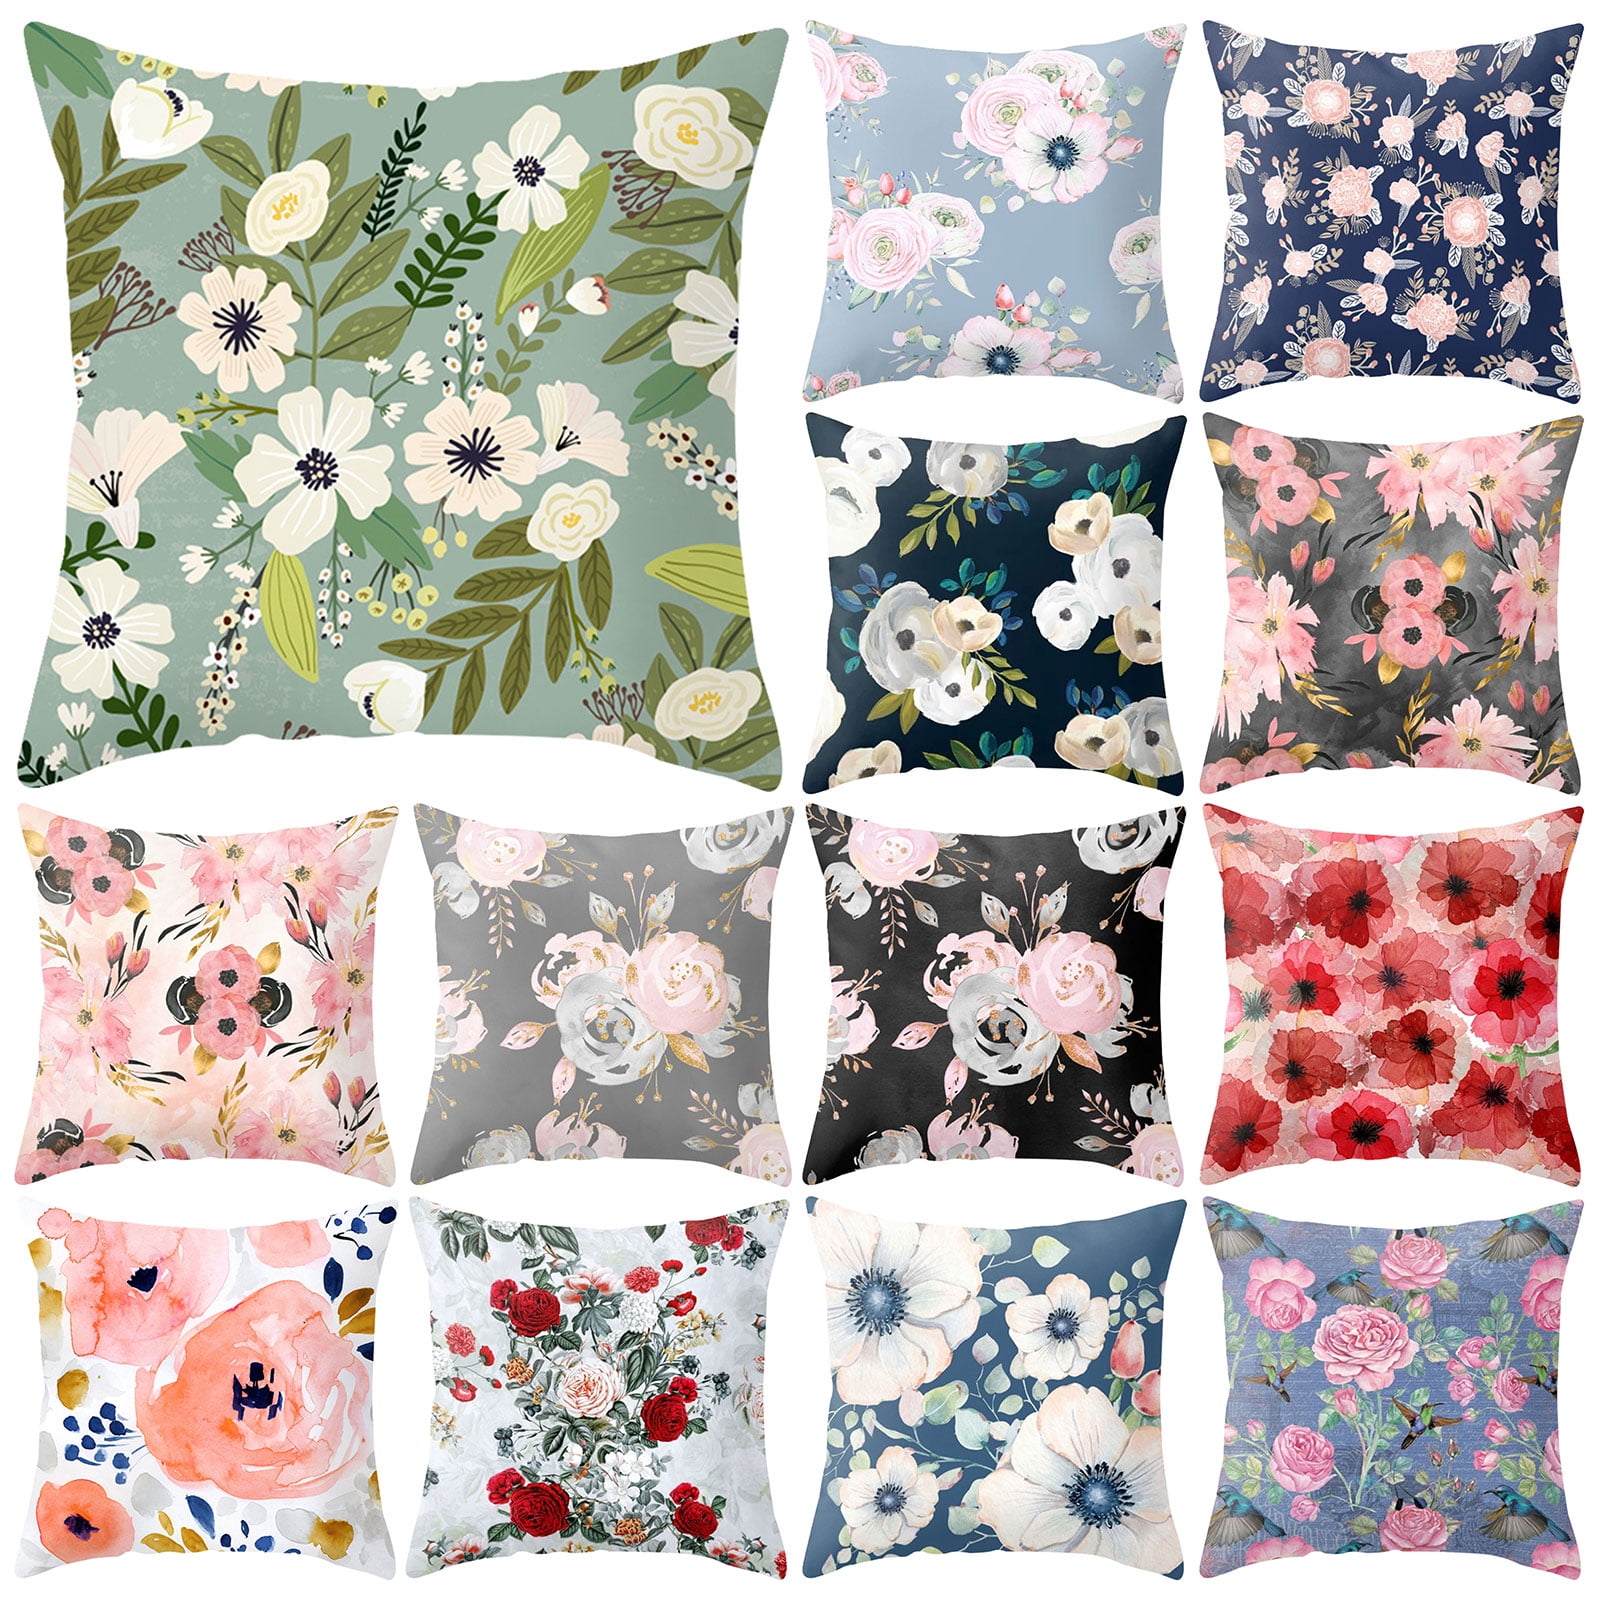 Details about   Tufted Cushion Cover Pillowcase for Car Sofa Outdoor Indoor Couch Decoration 